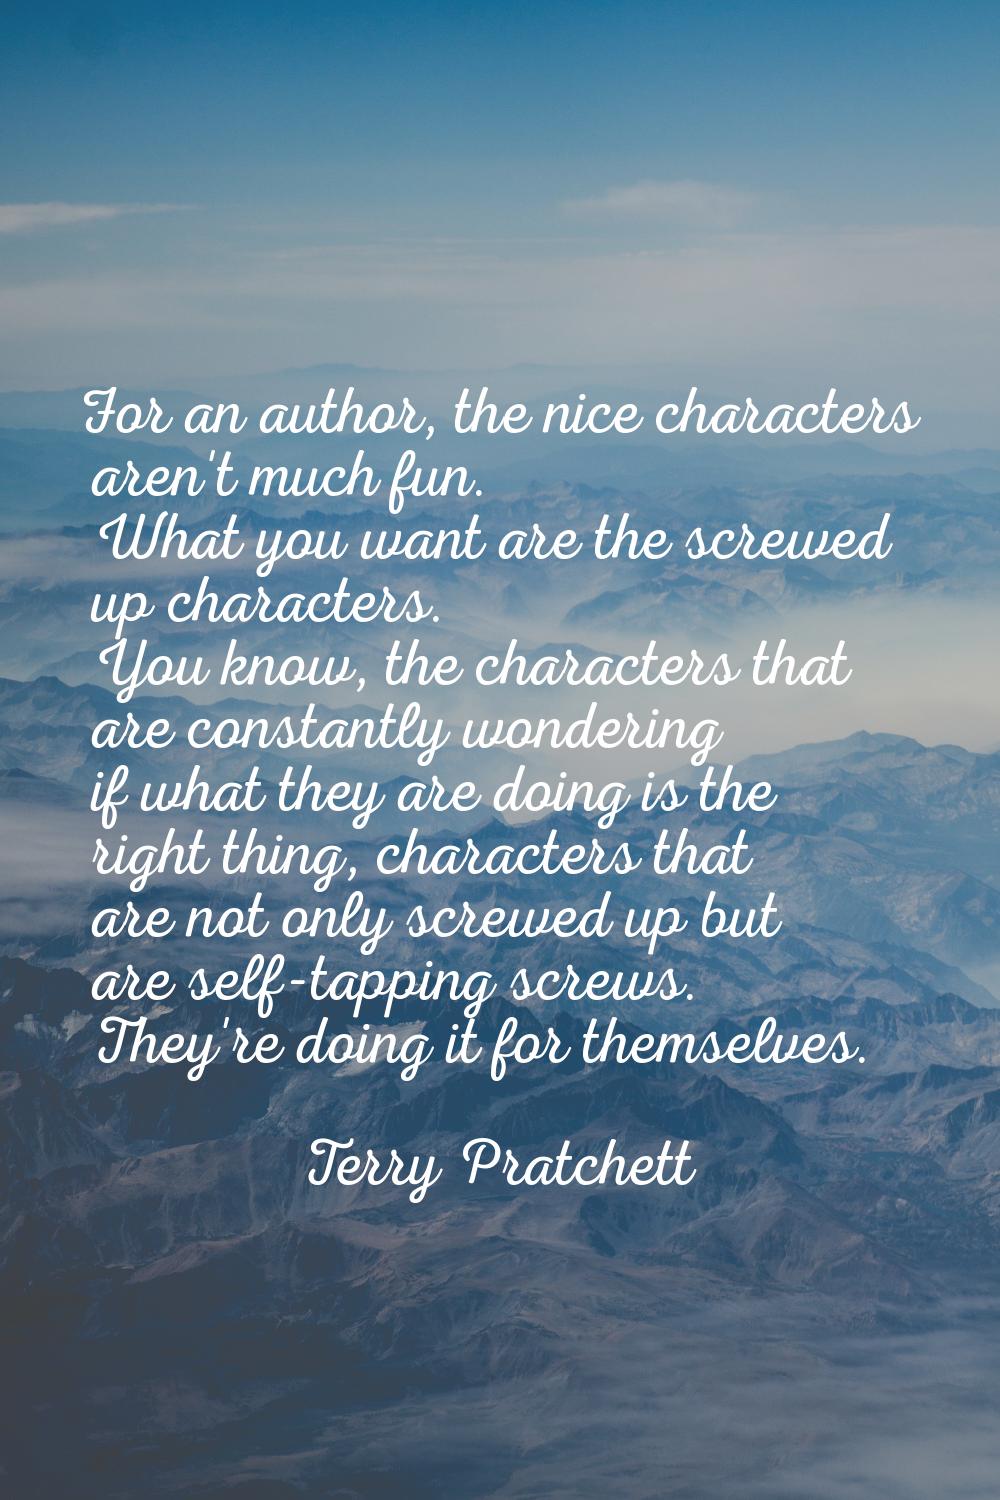 For an author, the nice characters aren't much fun. What you want are the screwed up characters. Yo